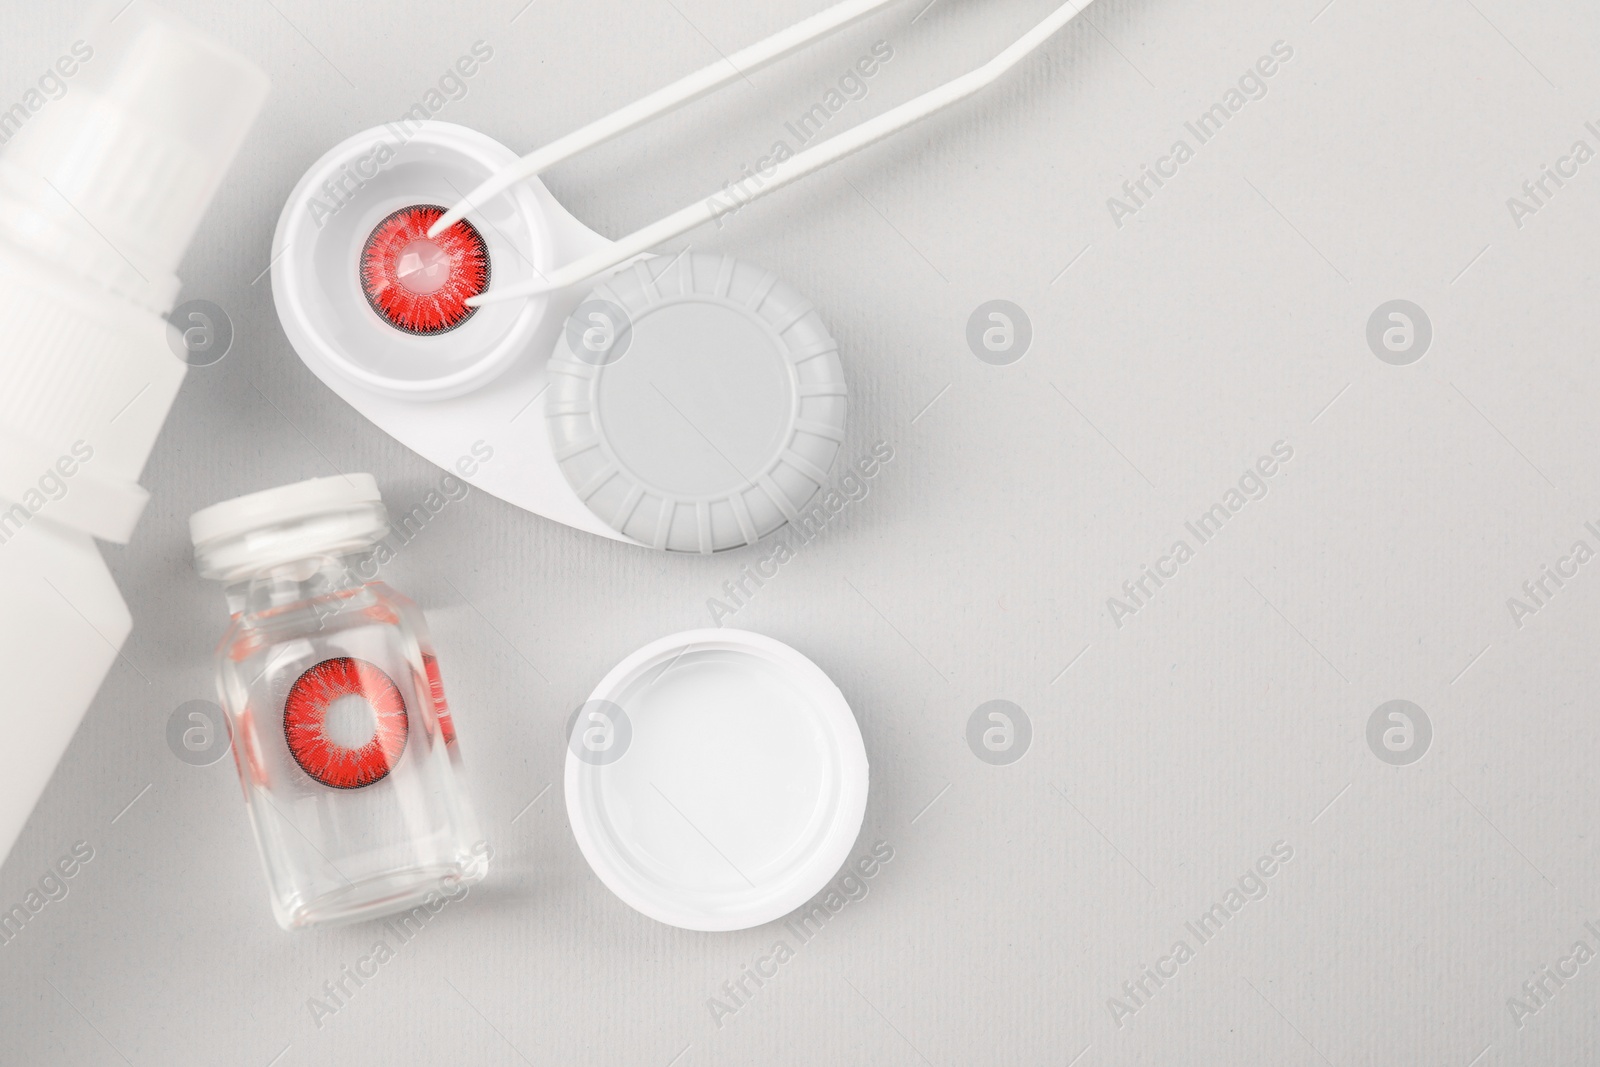 Photo of Case with red contact lenses, bottle of solution and tweezers on light grey background, flat lay. Space for text